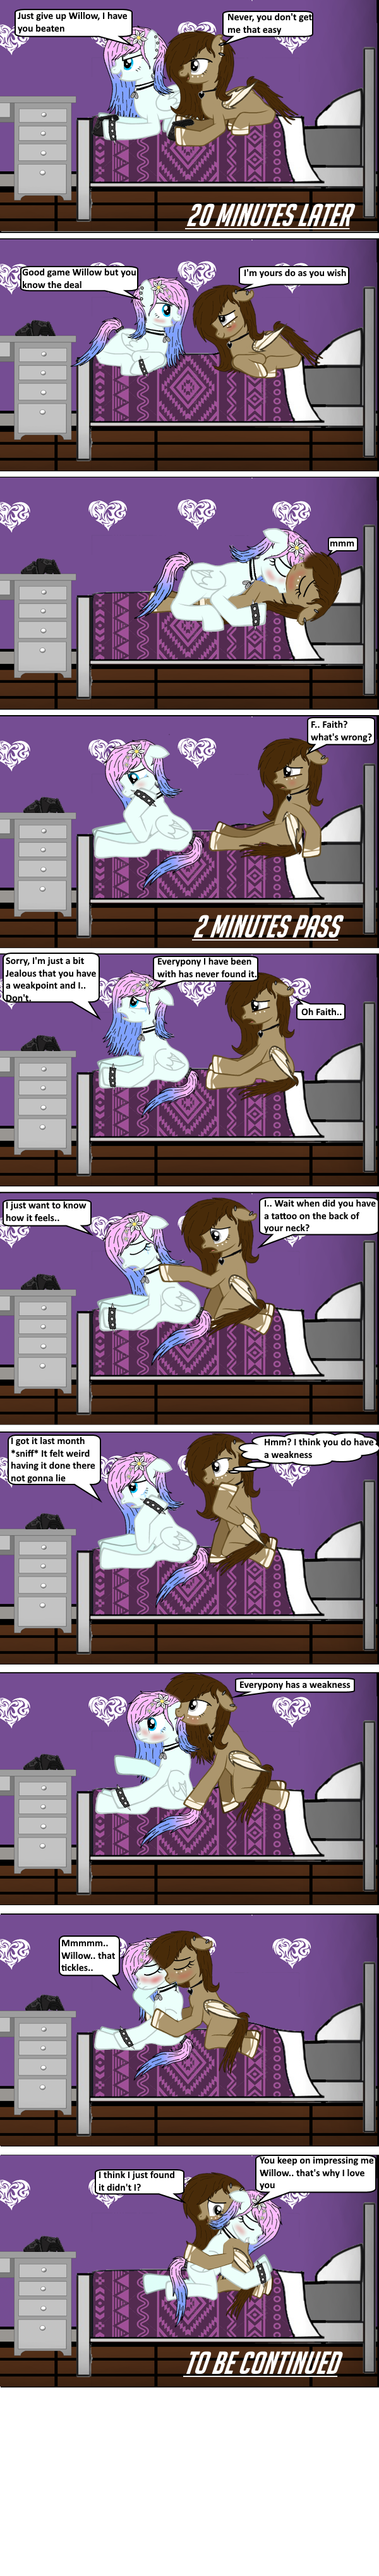 Page 9 - Everypony Has A Weakness